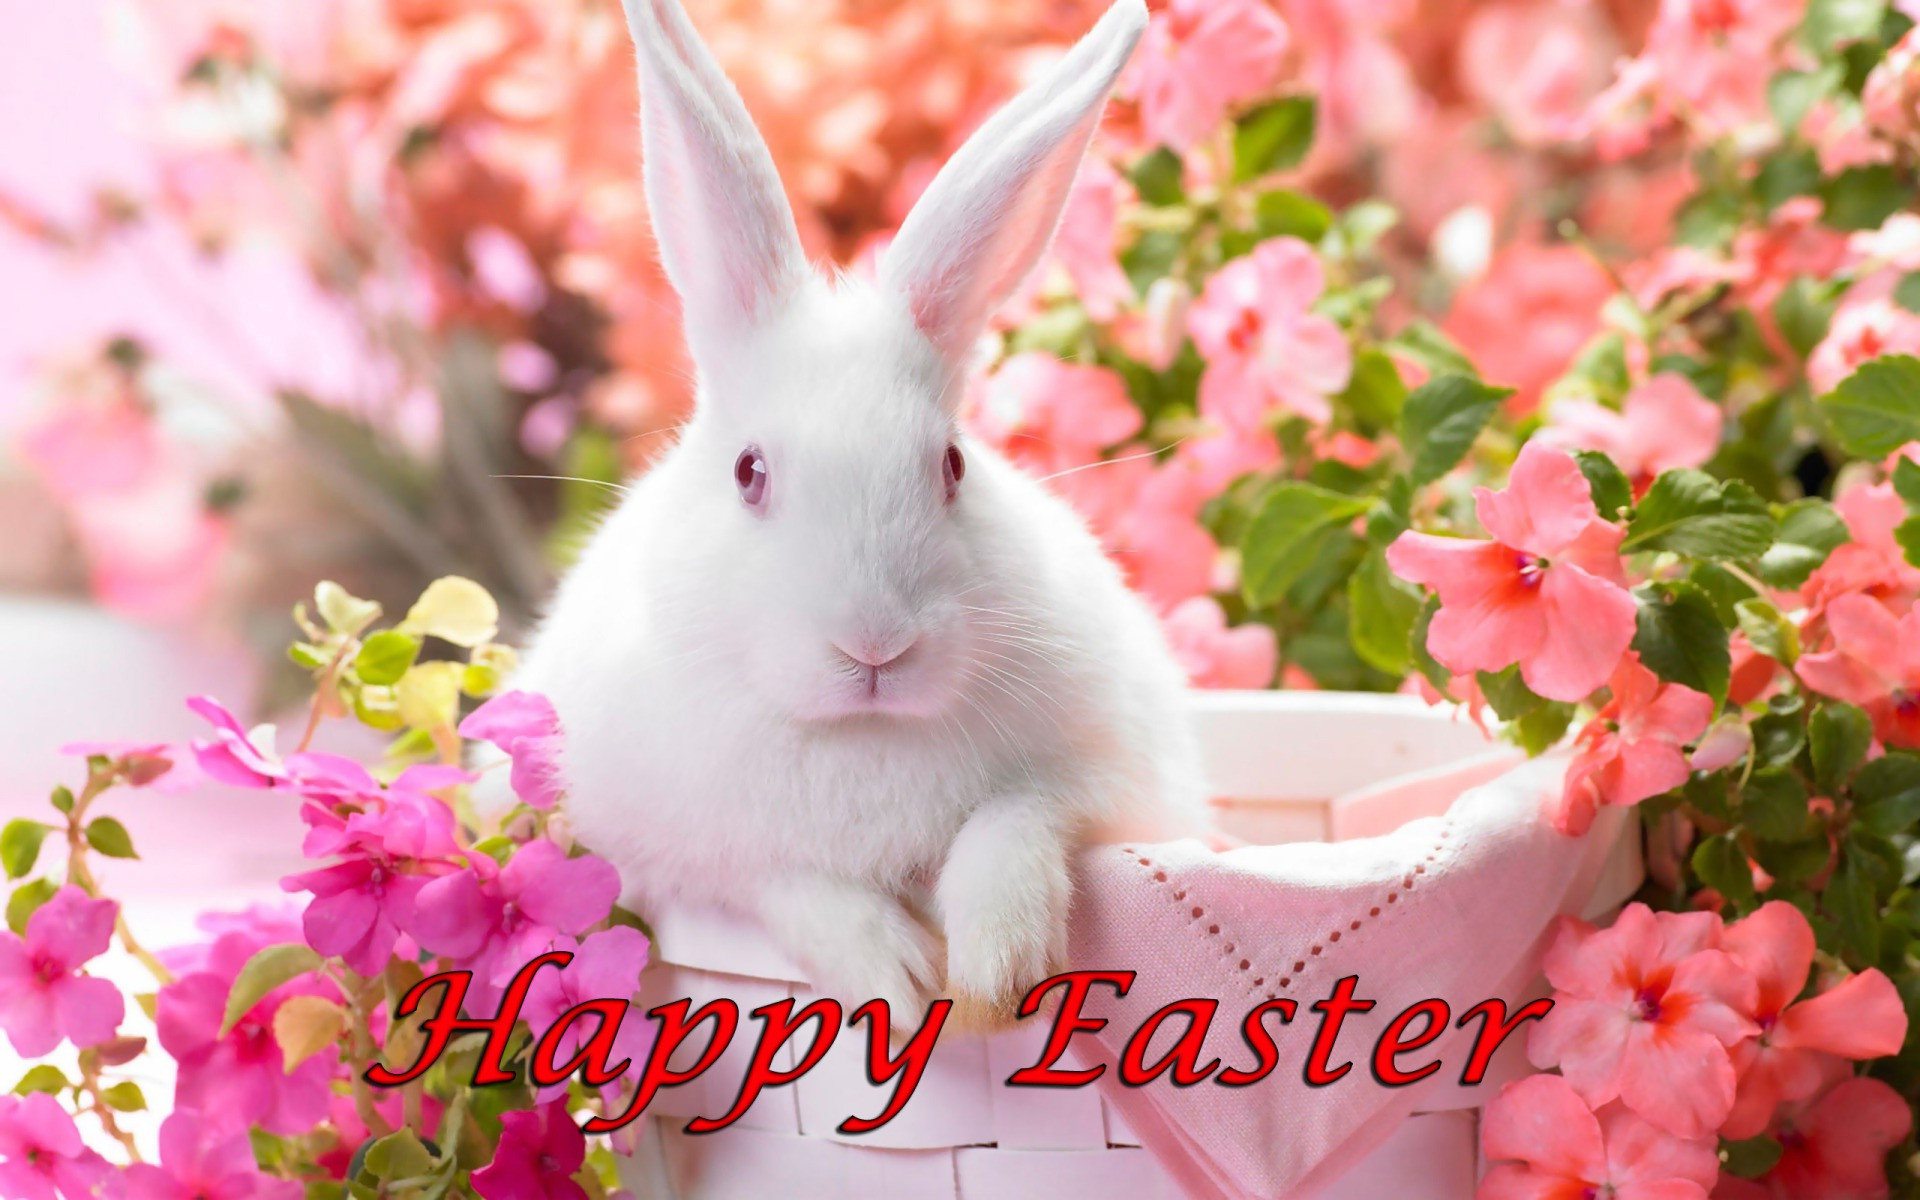 Happy Easter, White Bunny in Basket Surrounded by Flowers .